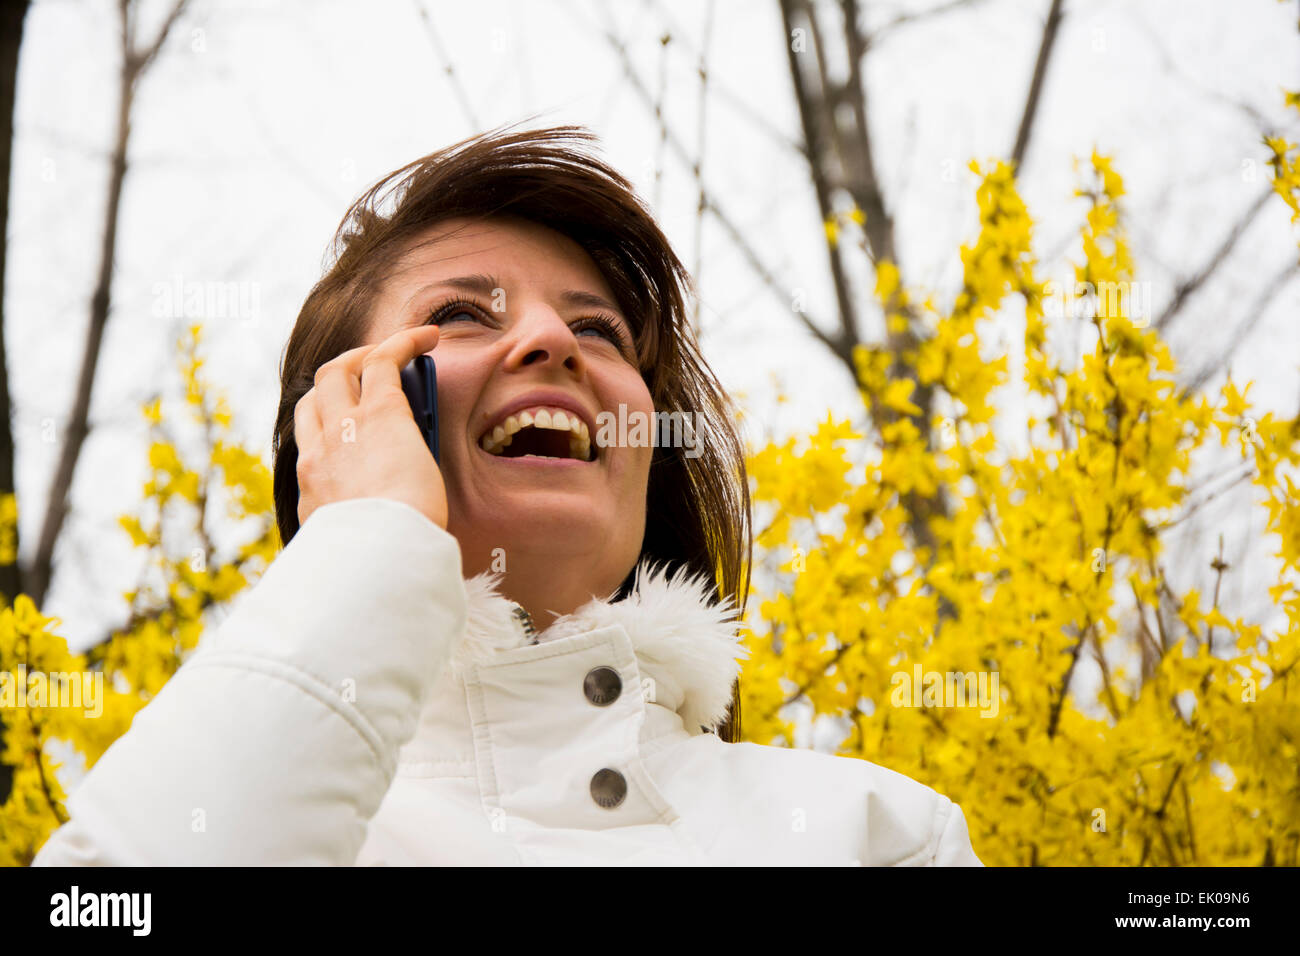 Pretty young woman smiling while talking on the phone.She is smiling as she is communicating with her friends in spring blossom. Stock Photo